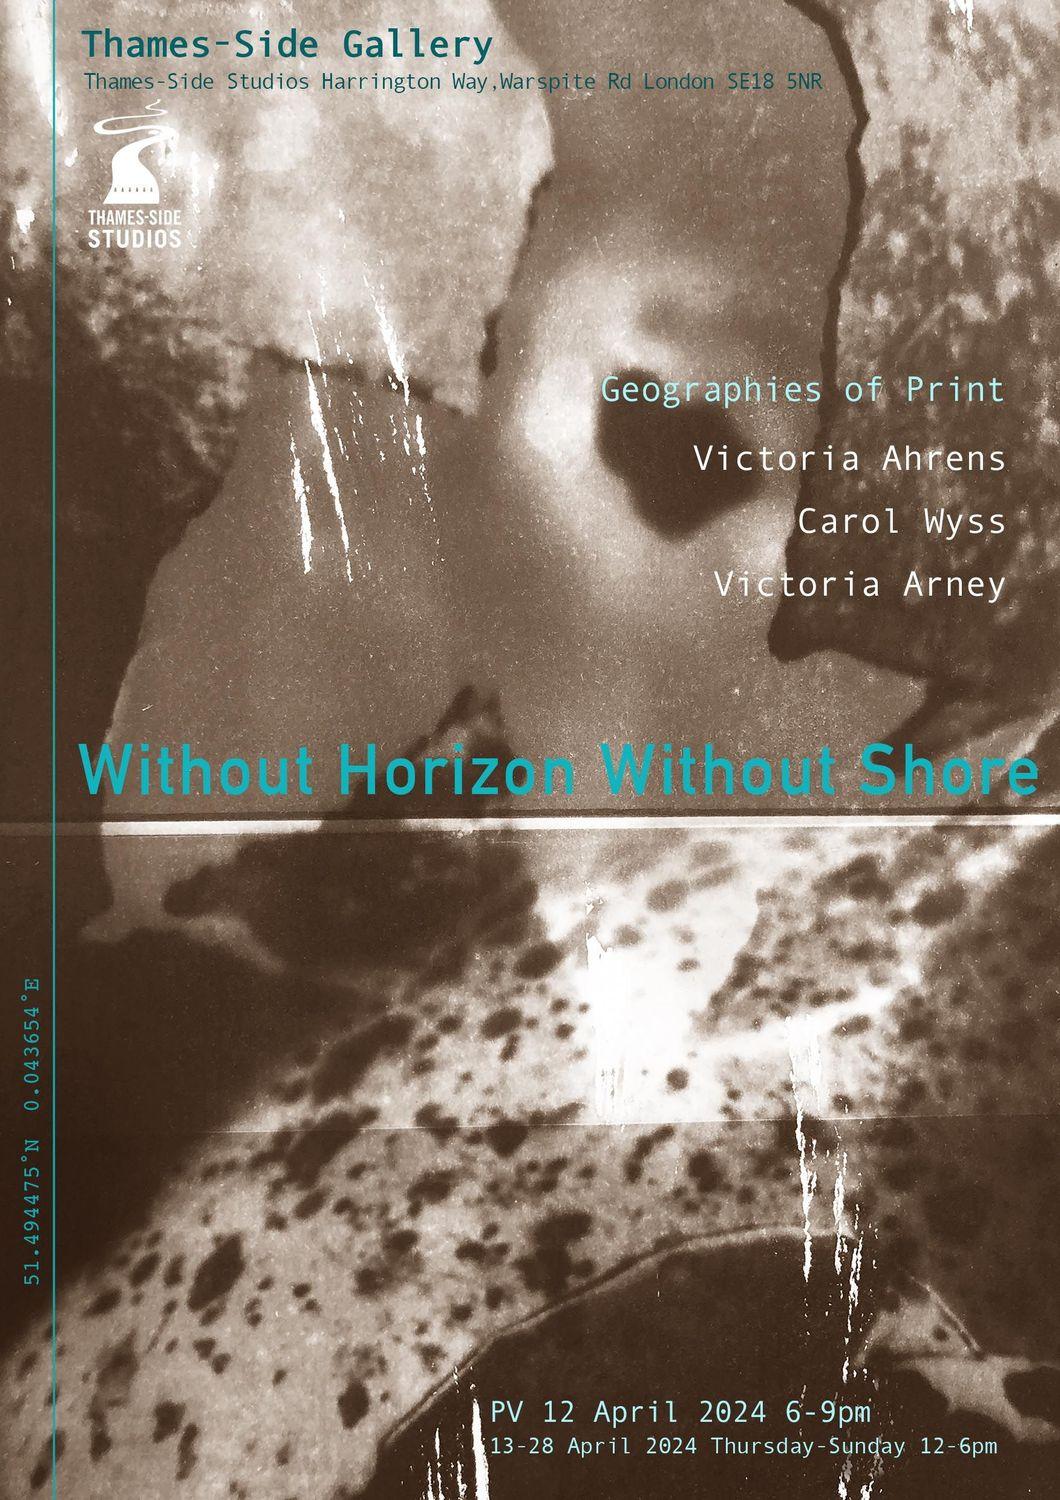 Without Horizon Without Shore  | Victoria Arney, Victoria Ahrens, Carol Wyss | Thames-Side Studios